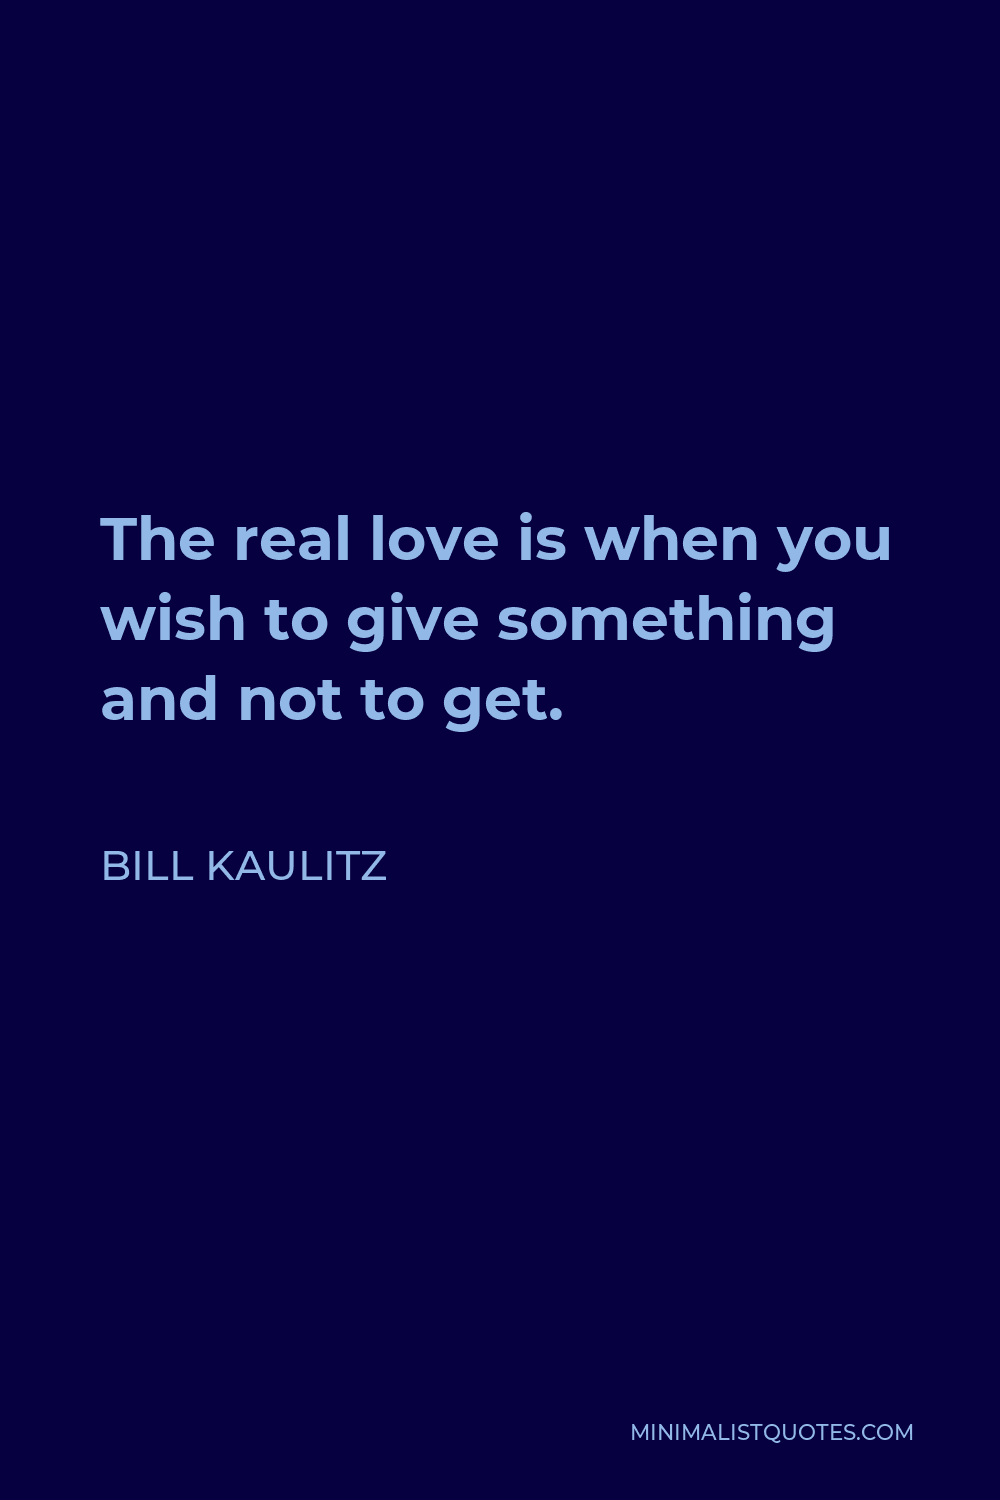 Bill Kaulitz Quote - The real love is when you wish to give something and not to get.